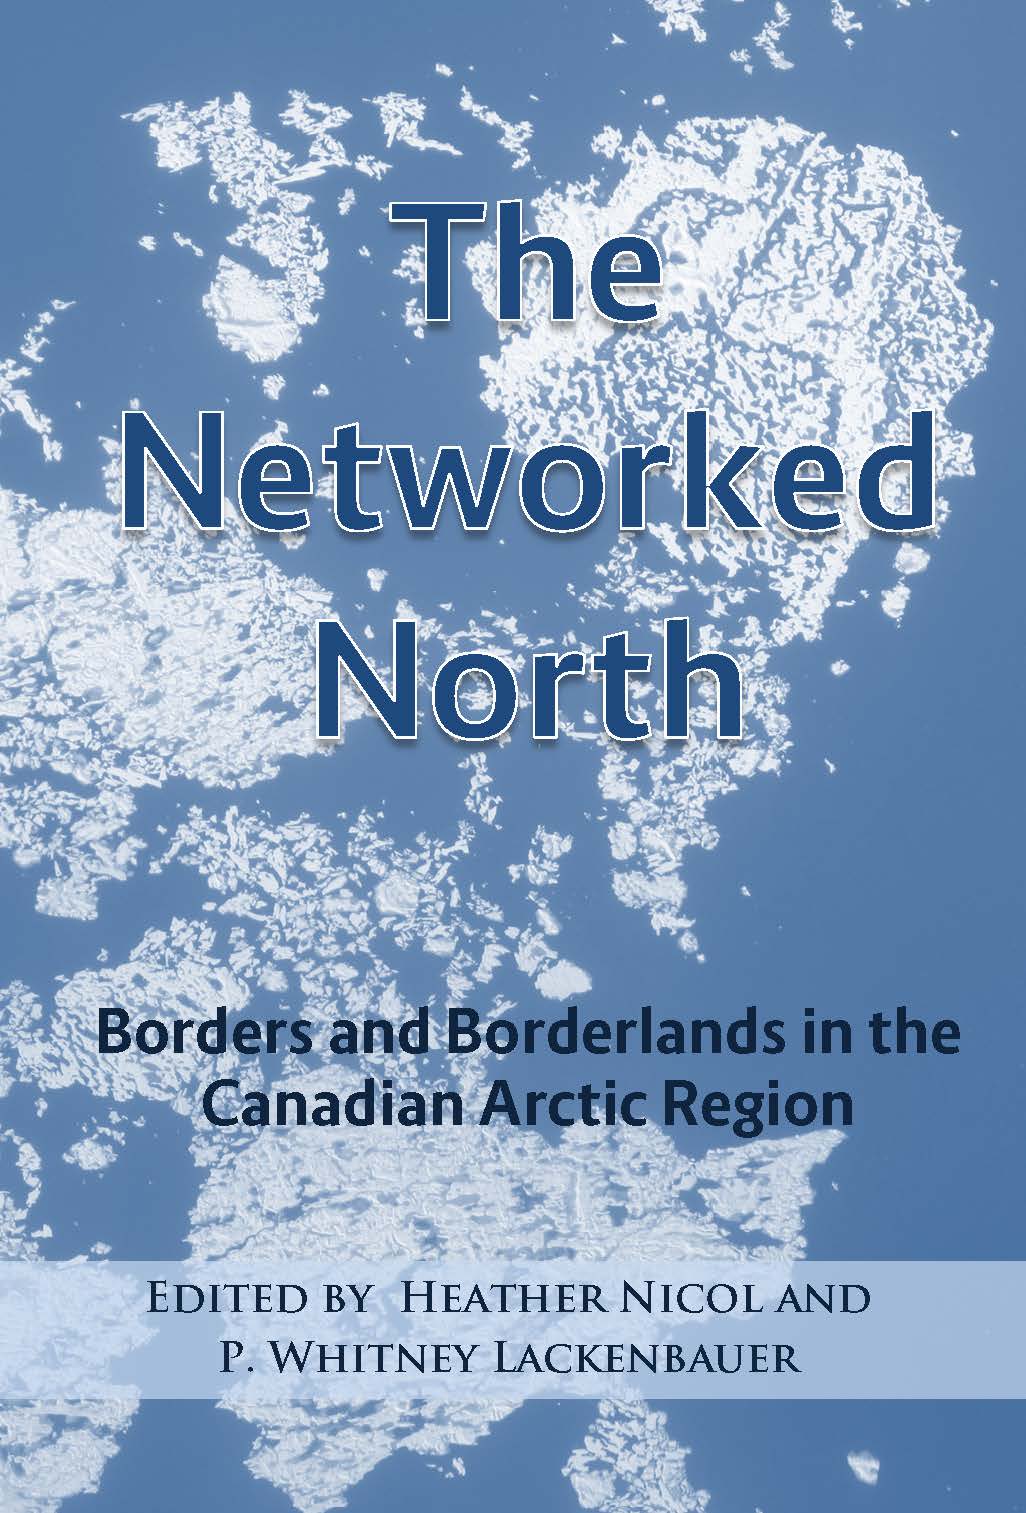 Front cover of Book THE NETWORKED NORTH edited by Heather Nicol and P. Whitney Lackenbauer,